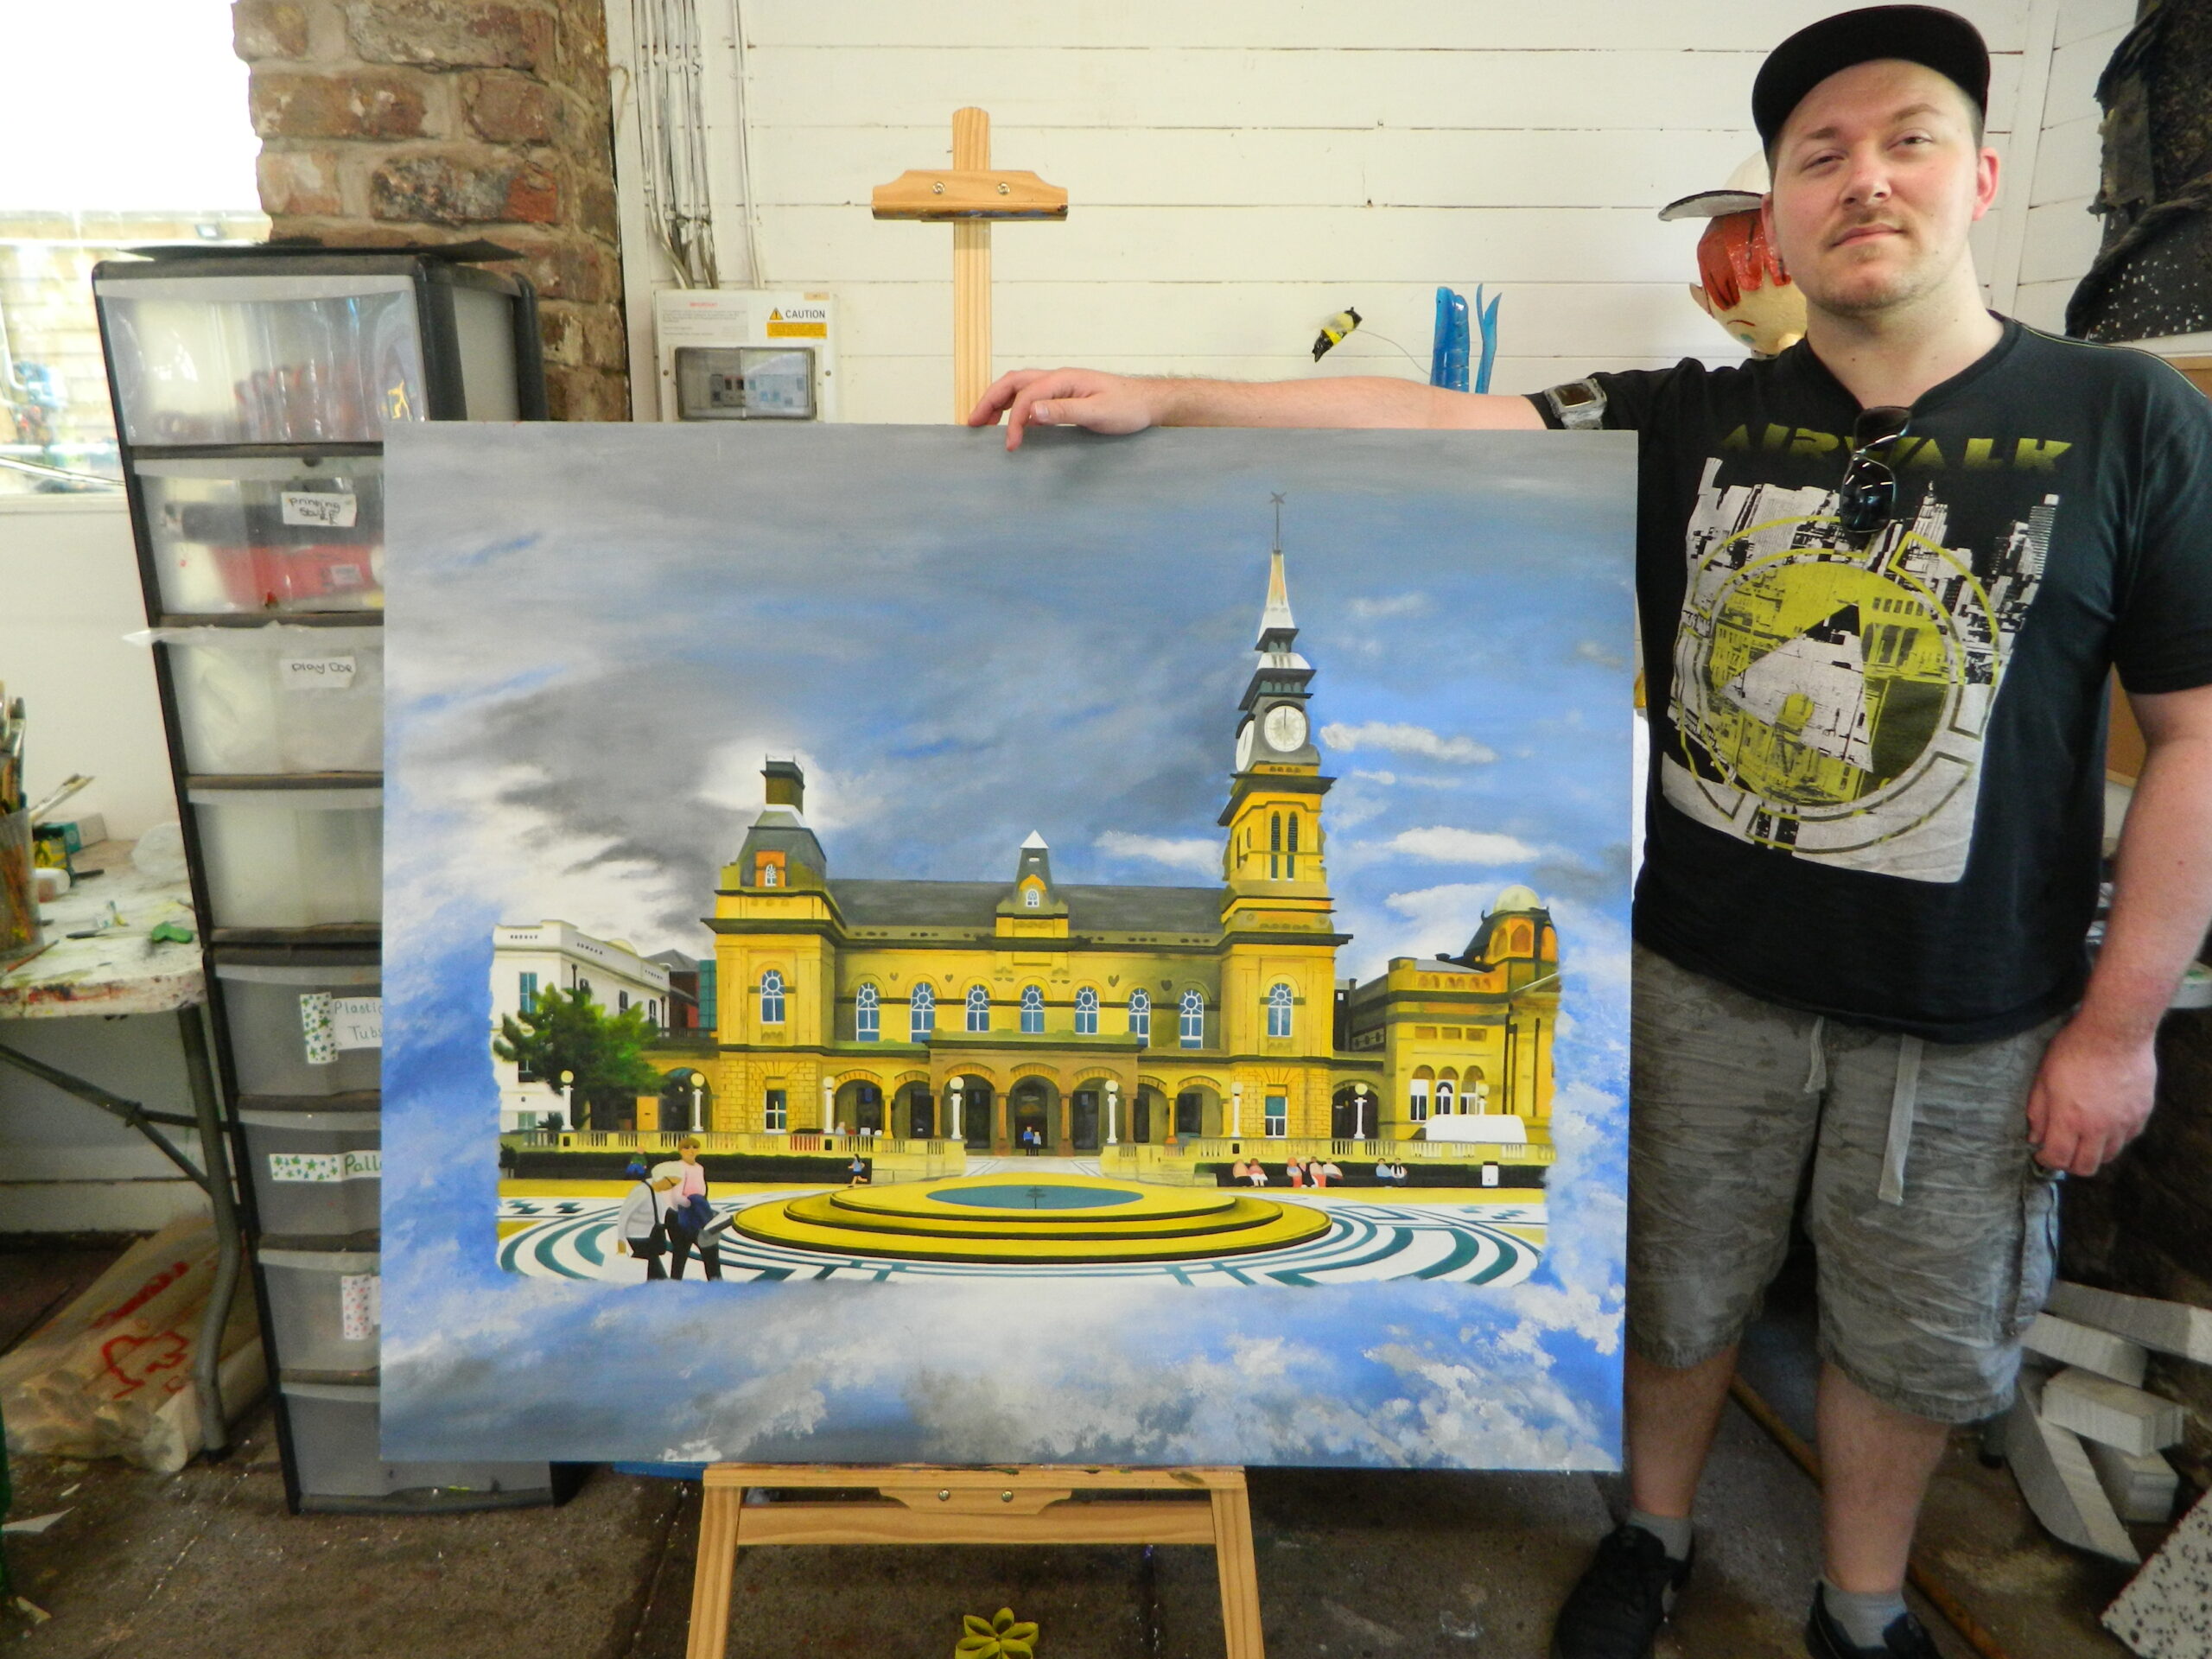 Kyle McNamara with his painting of The Atkinson in Southport